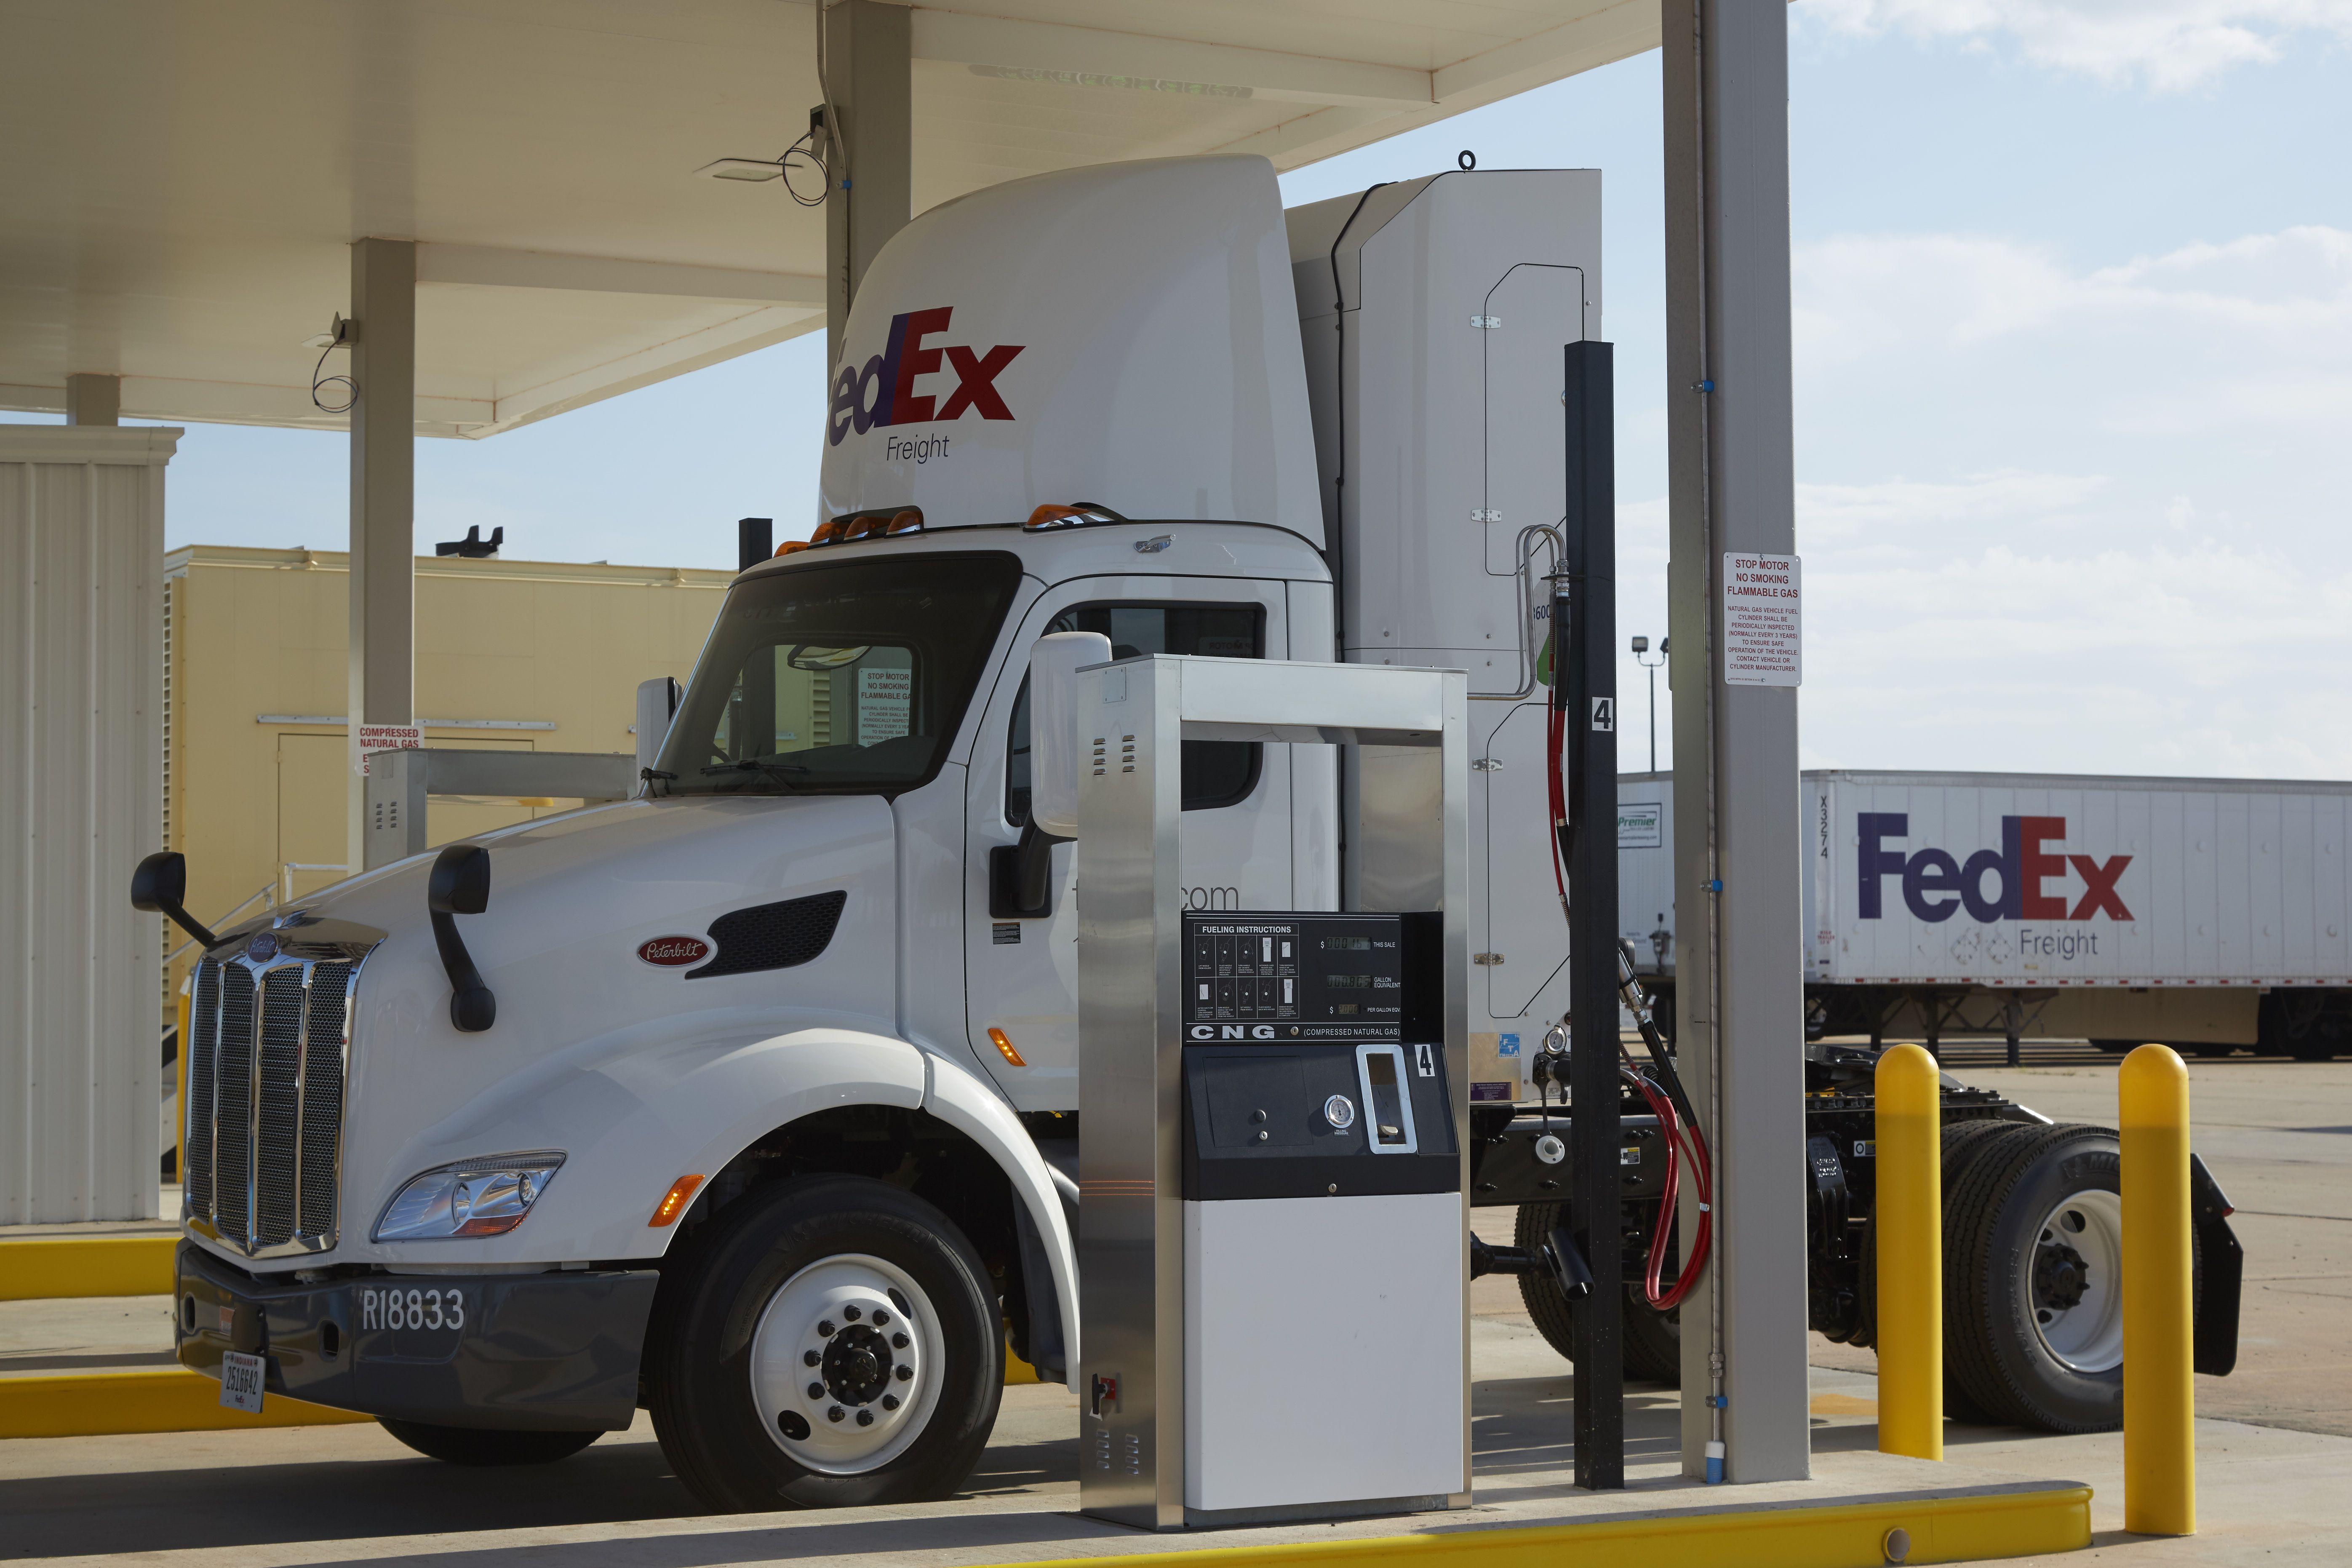 Green Van FedEx Ground Logo - FedEx Freight Invests in CNG Fueling at OKC Service Center